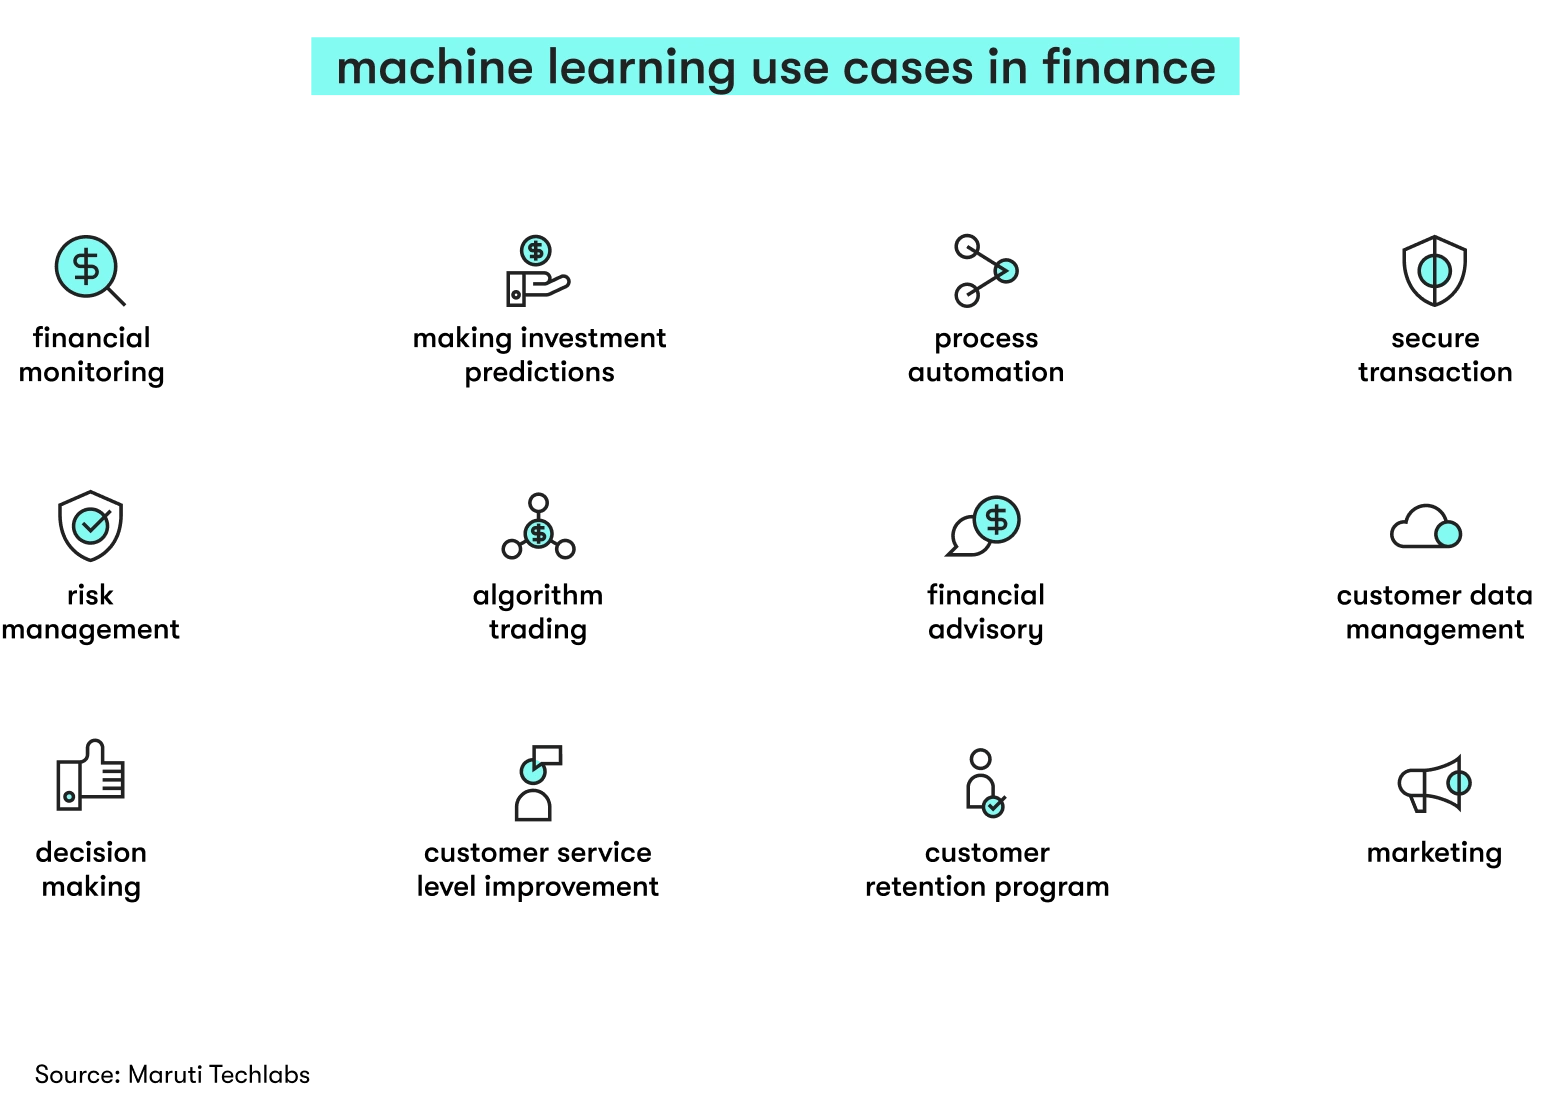 challenges in fintech: AI use cases in financial services